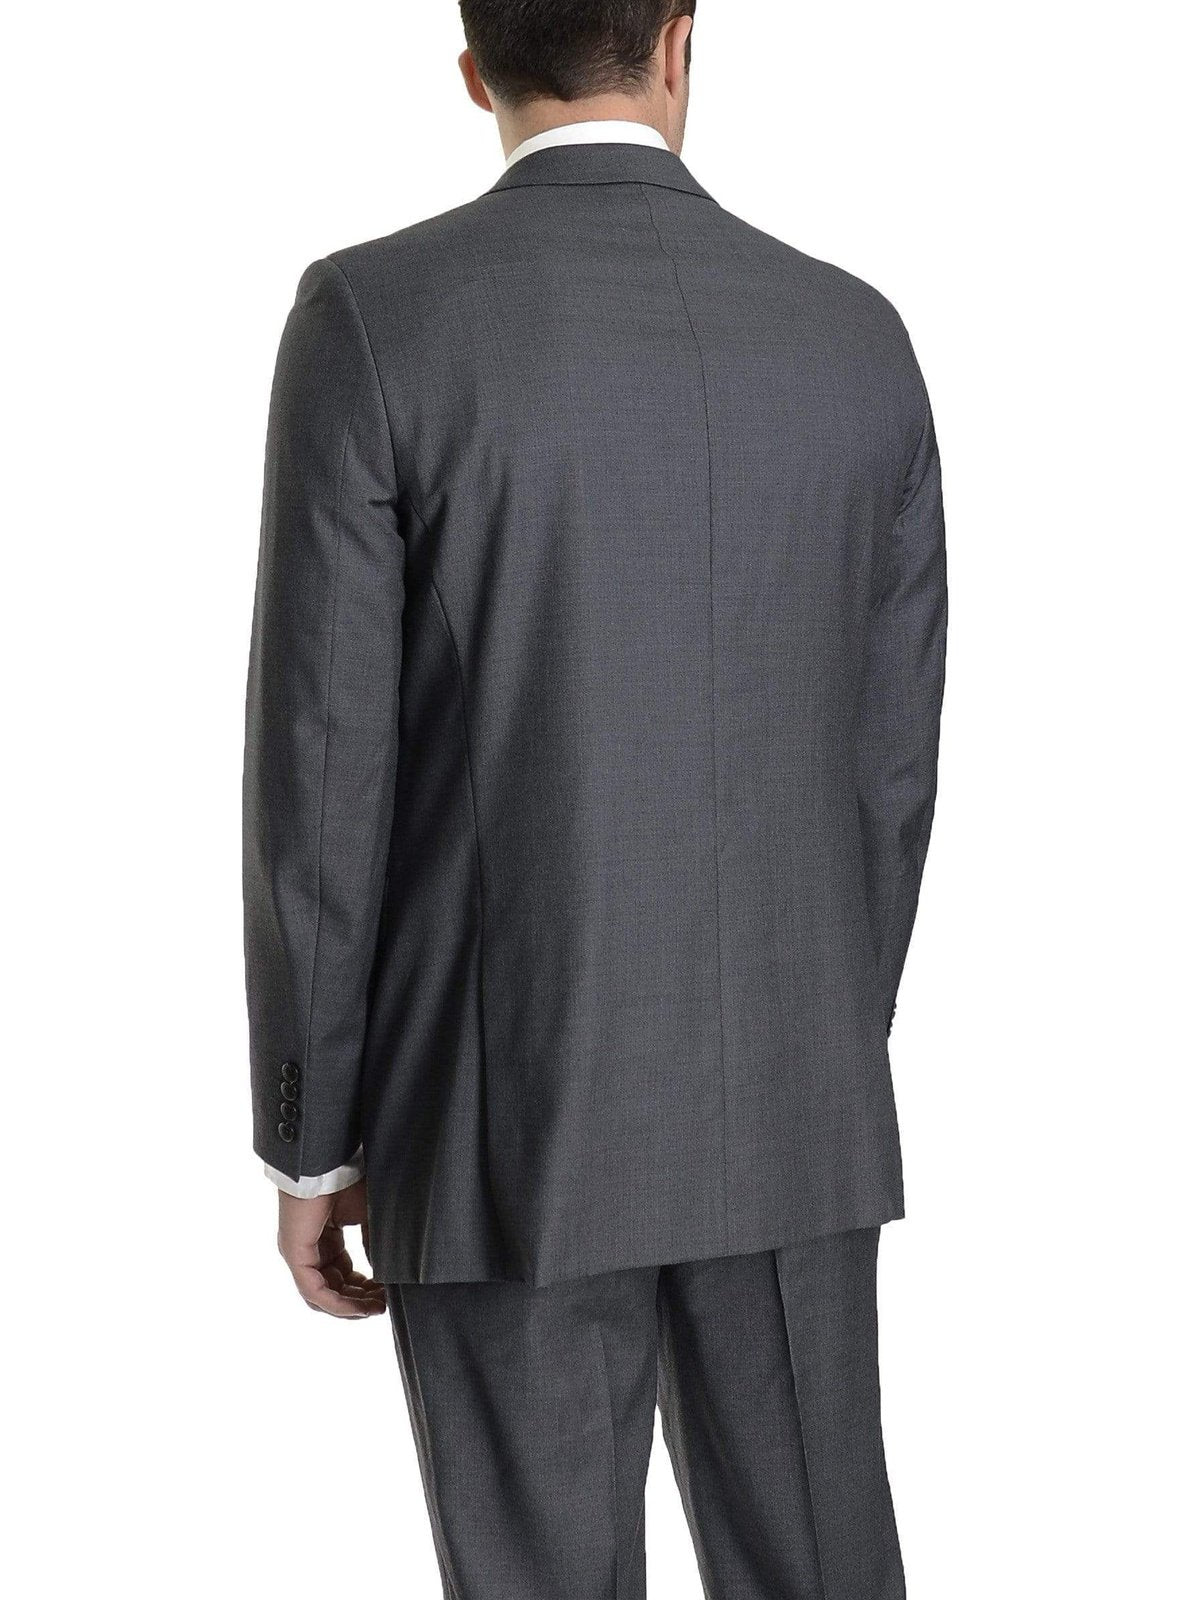 Raphael TWO PIECE SUITS Raphael Modern Fit Solid Gray Two Button Wool Suit